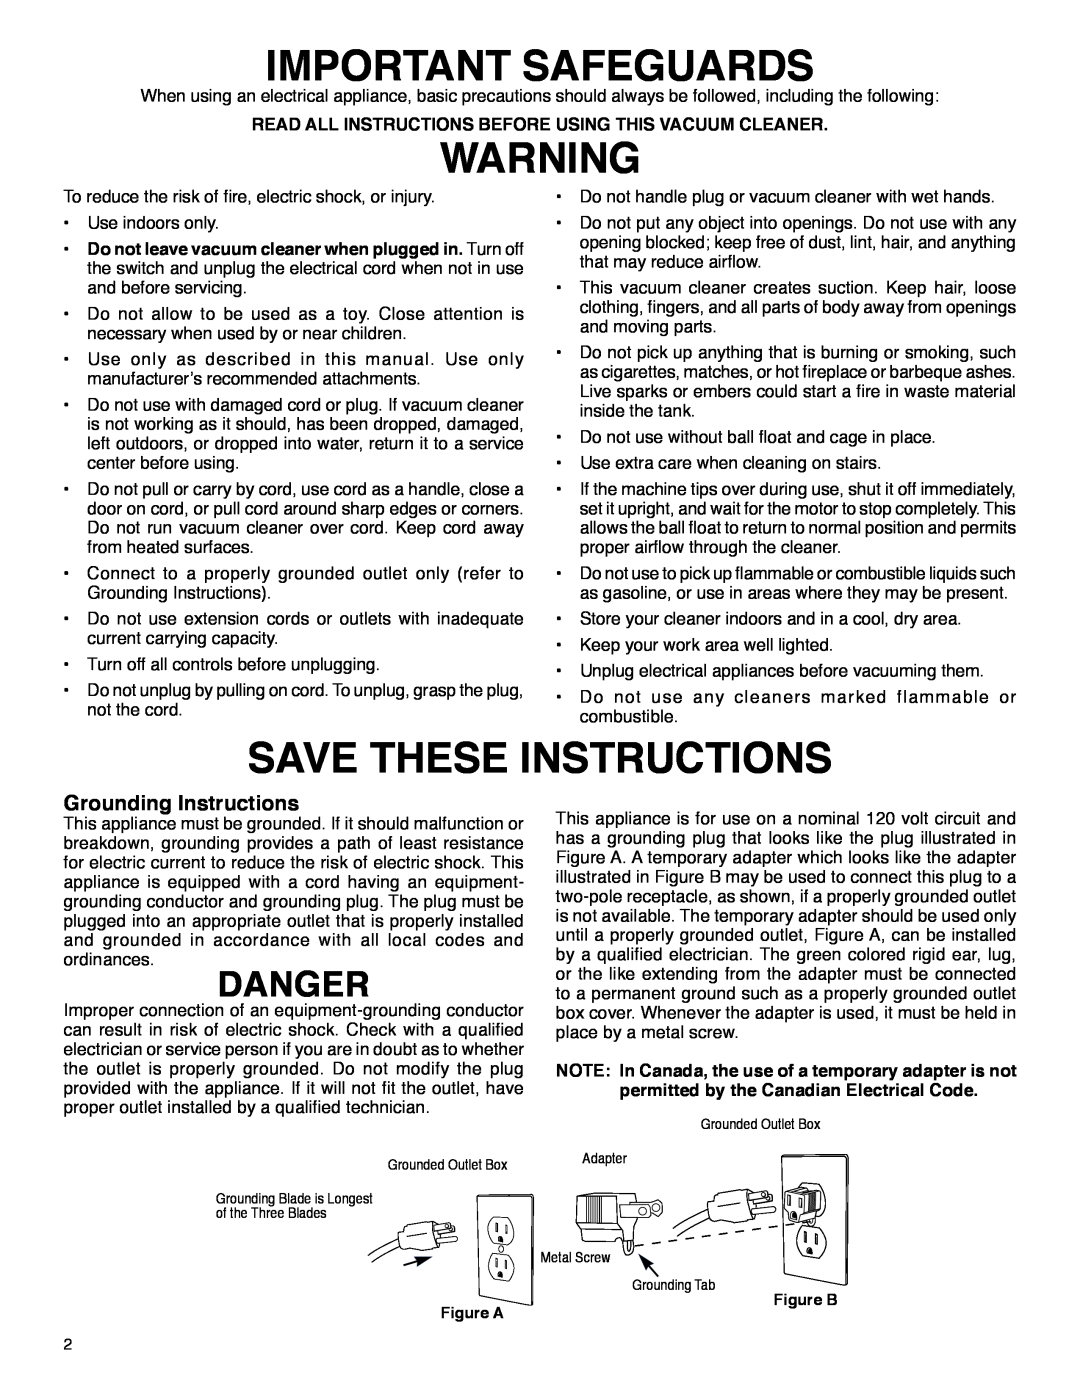 Sanitaire SC6080 warranty Important Safeguards, Save These Instructions, Danger, Grounding Instructions 